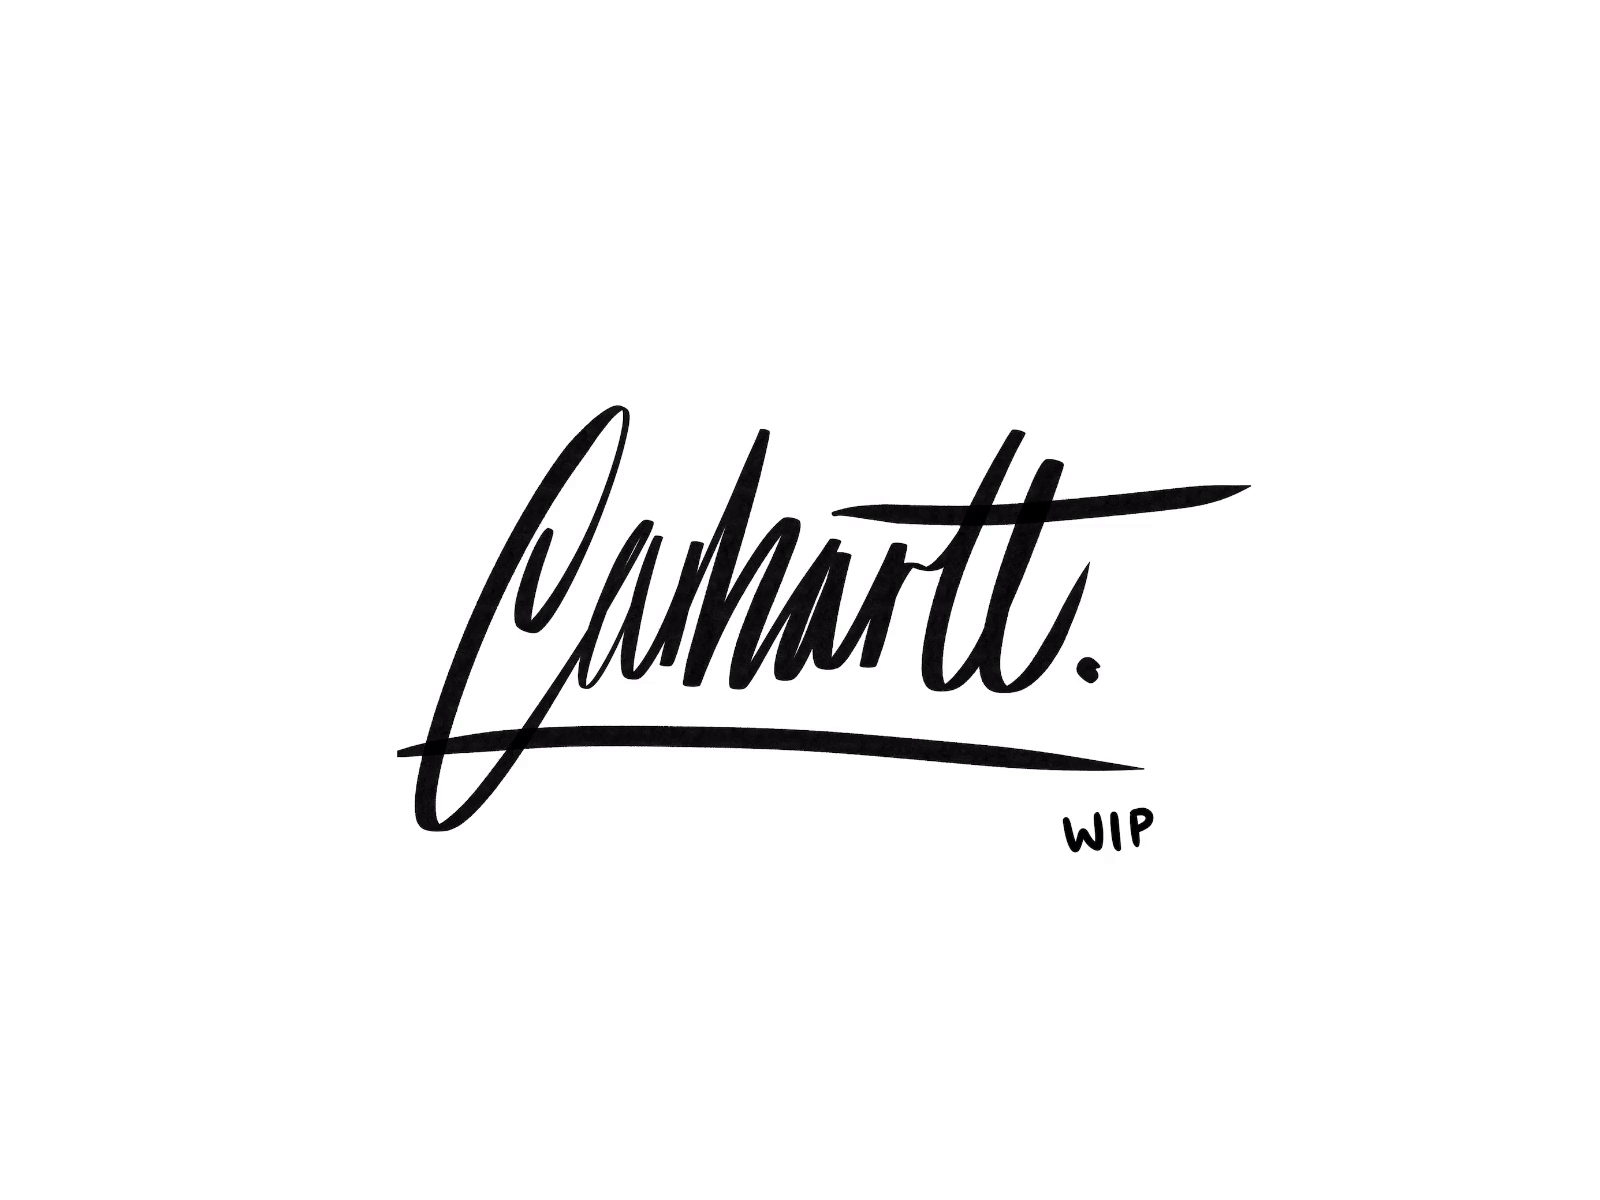 Carhartt Wip By Charles Patterson On Dribbble